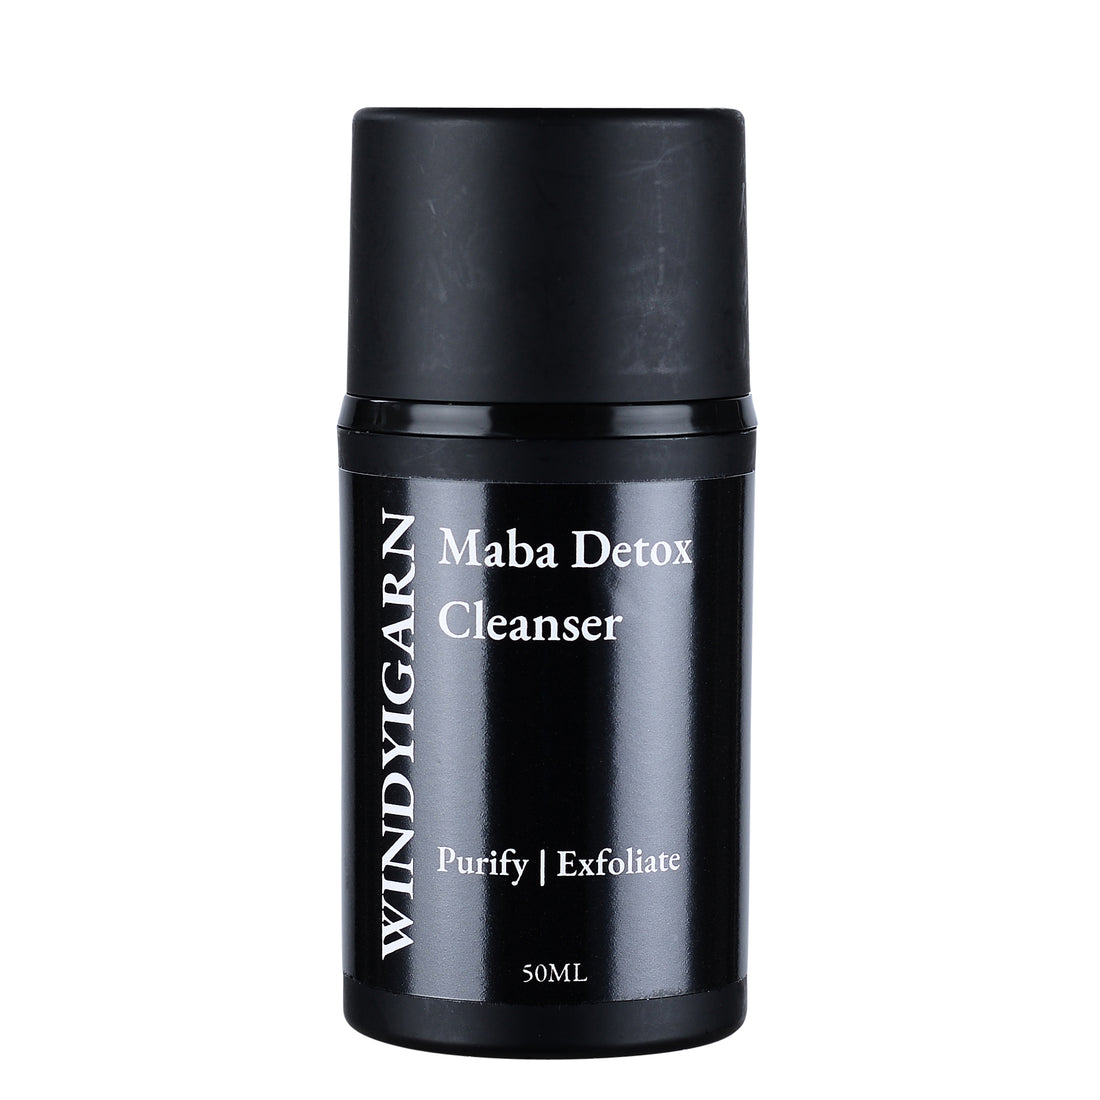 Maba Detox Cleanser